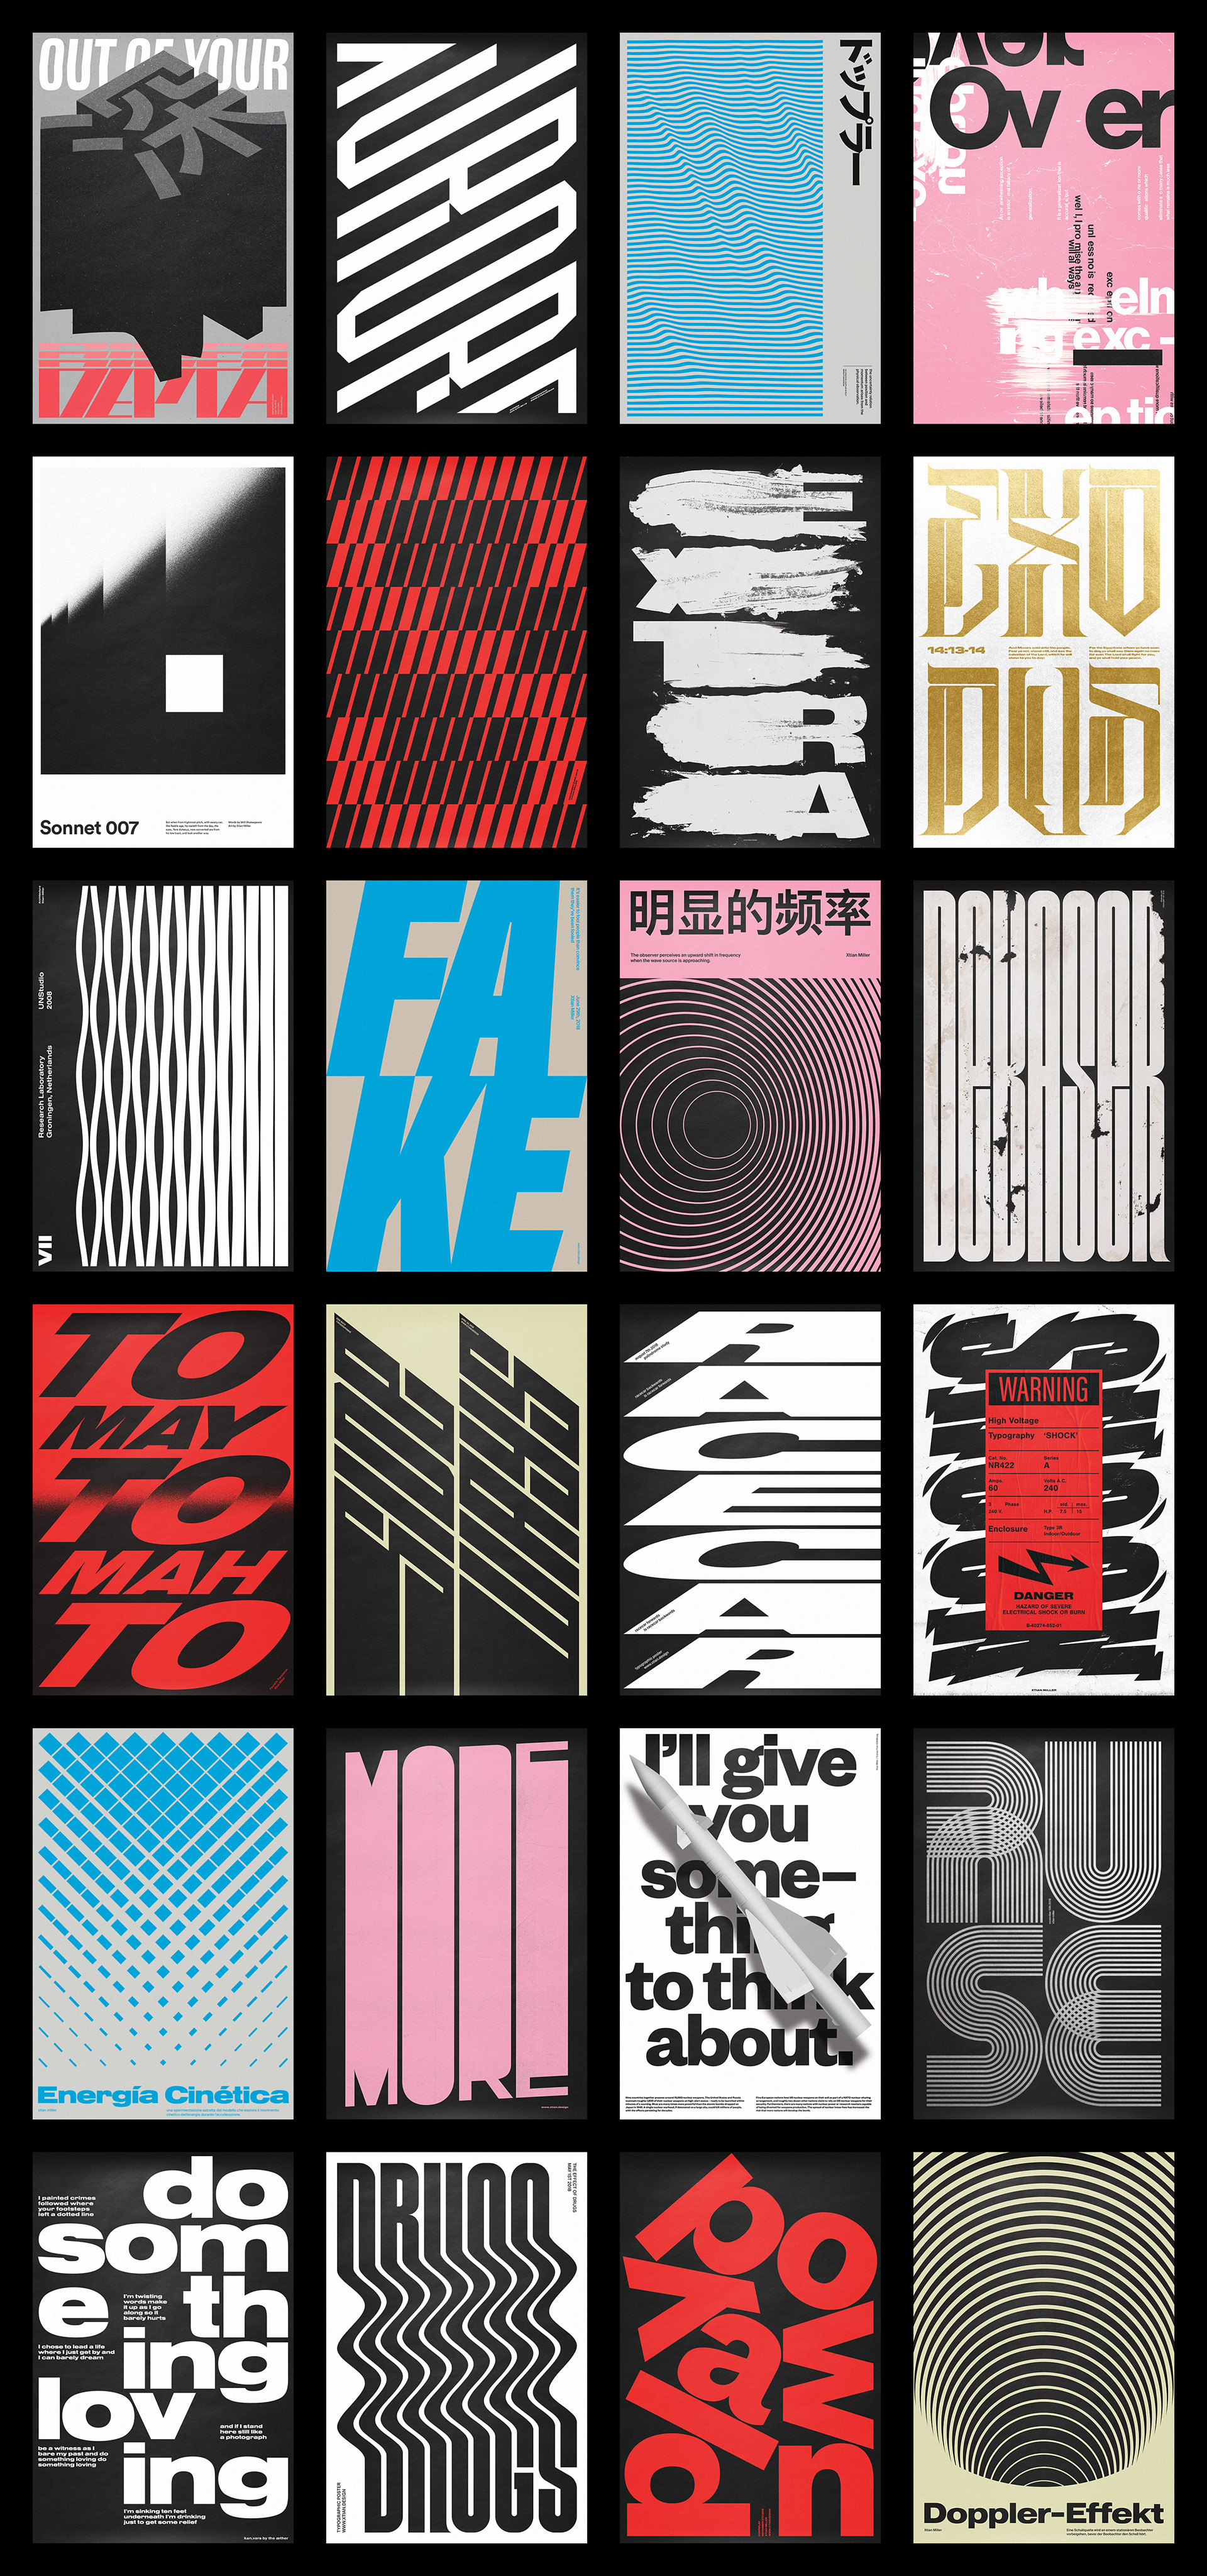 Selected posters from 2018 by Xtian Miller